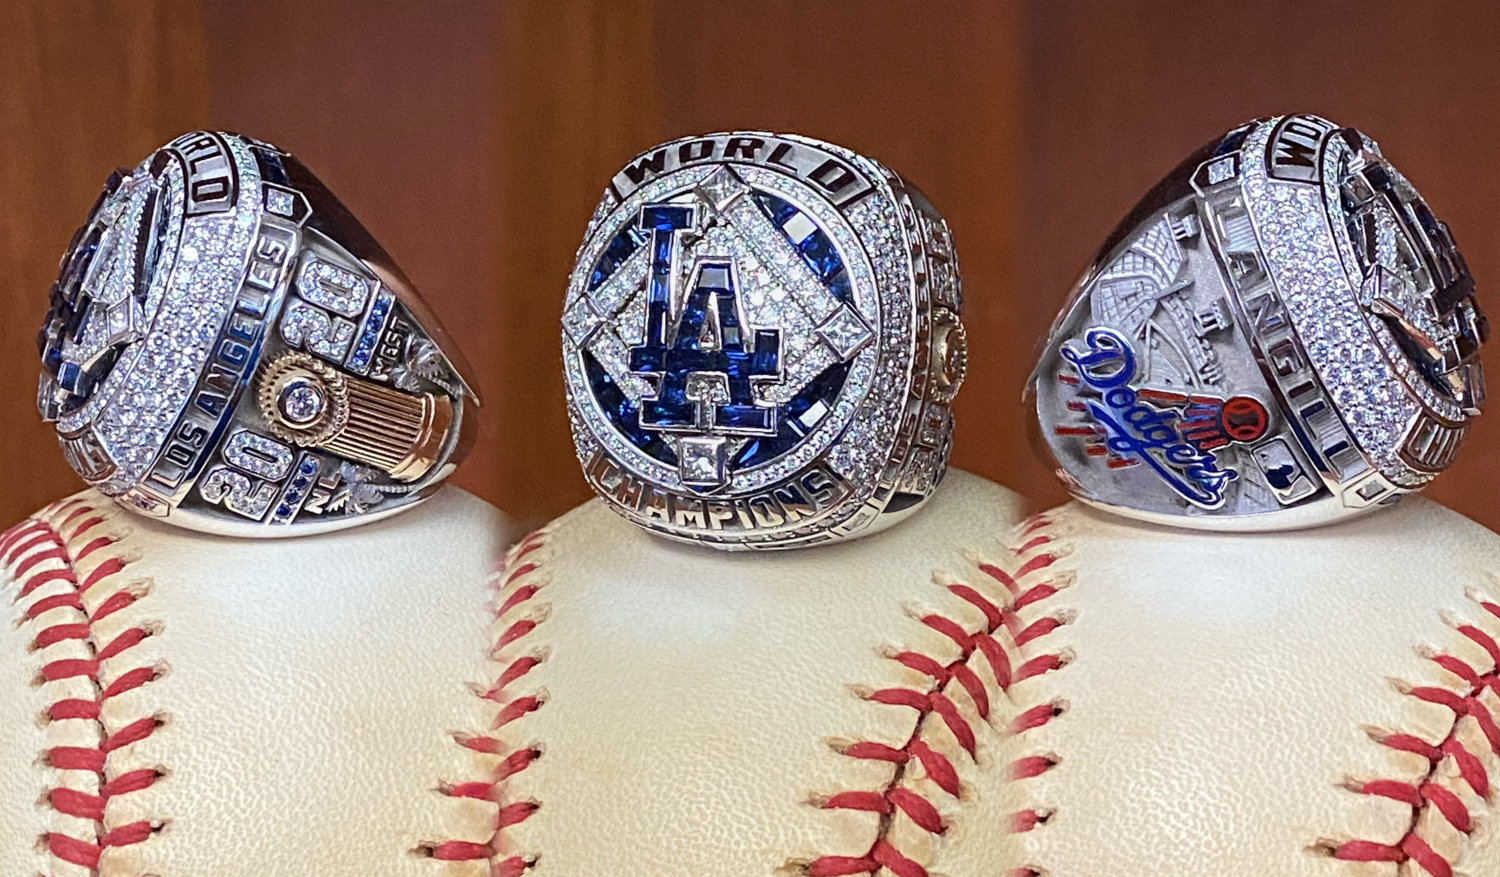 Dodgers receive World Series rings in pregame ceremony